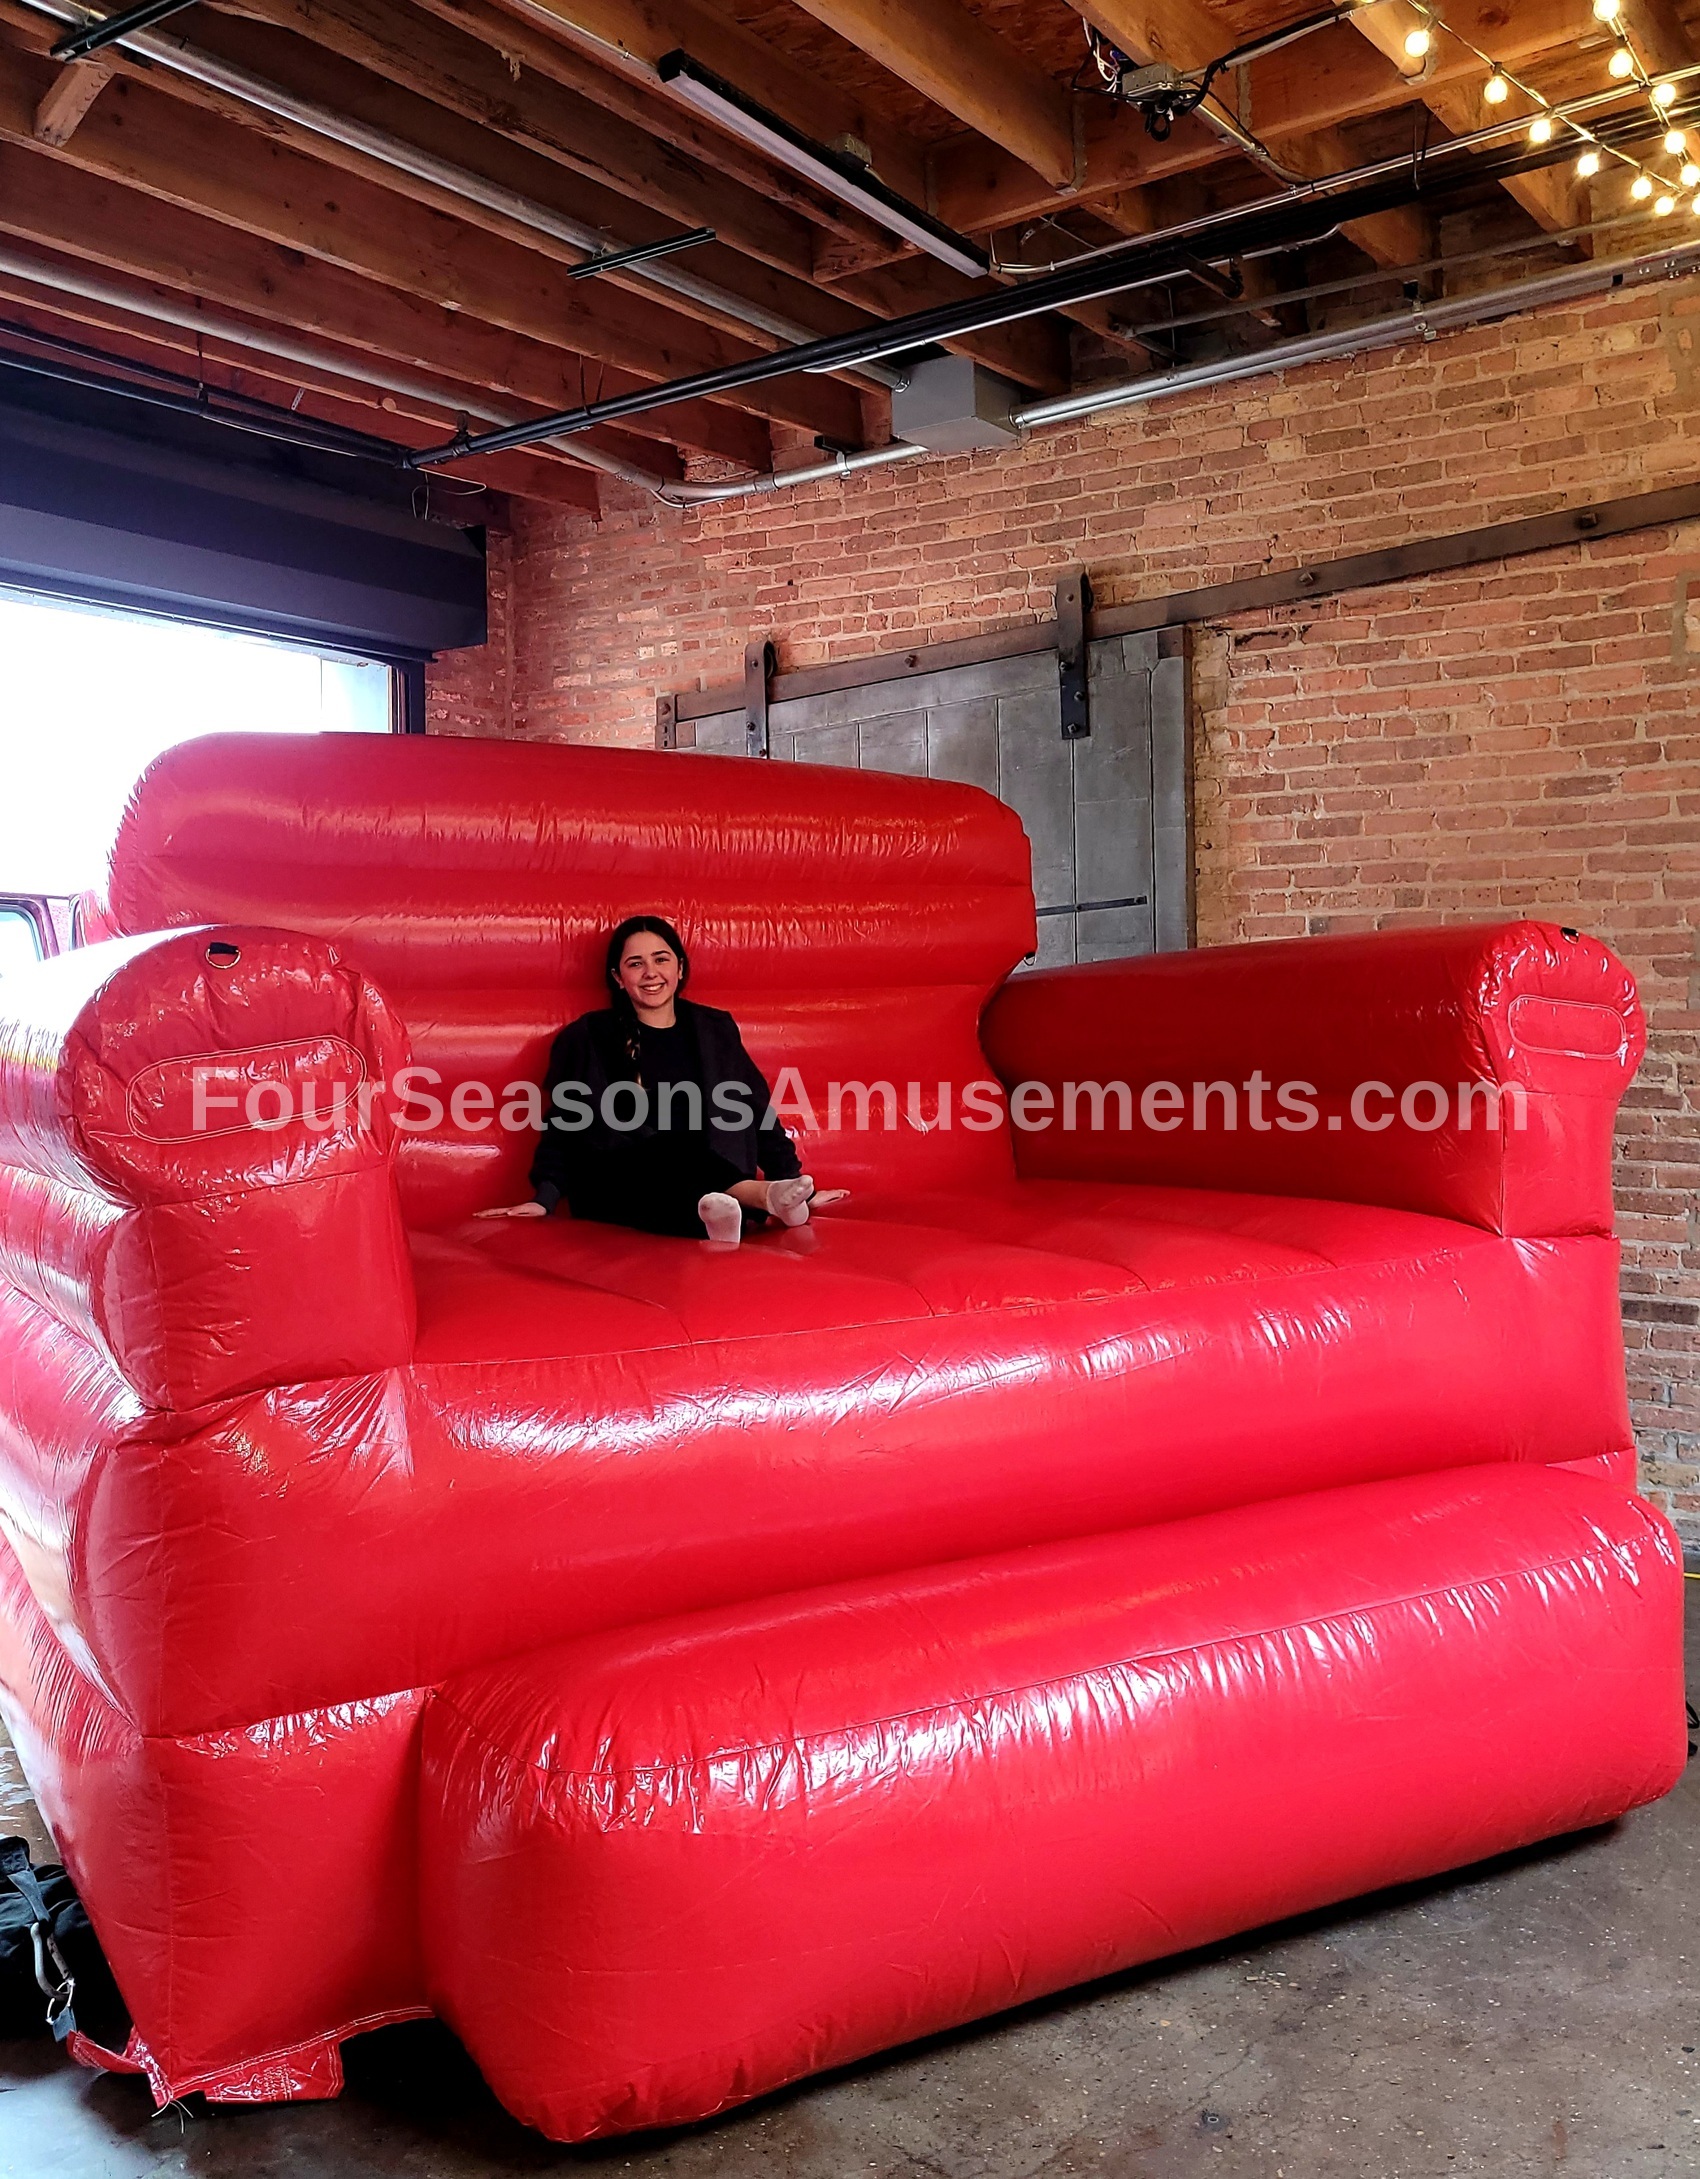 The Big Red Chair- Inflatable Photo Opp!